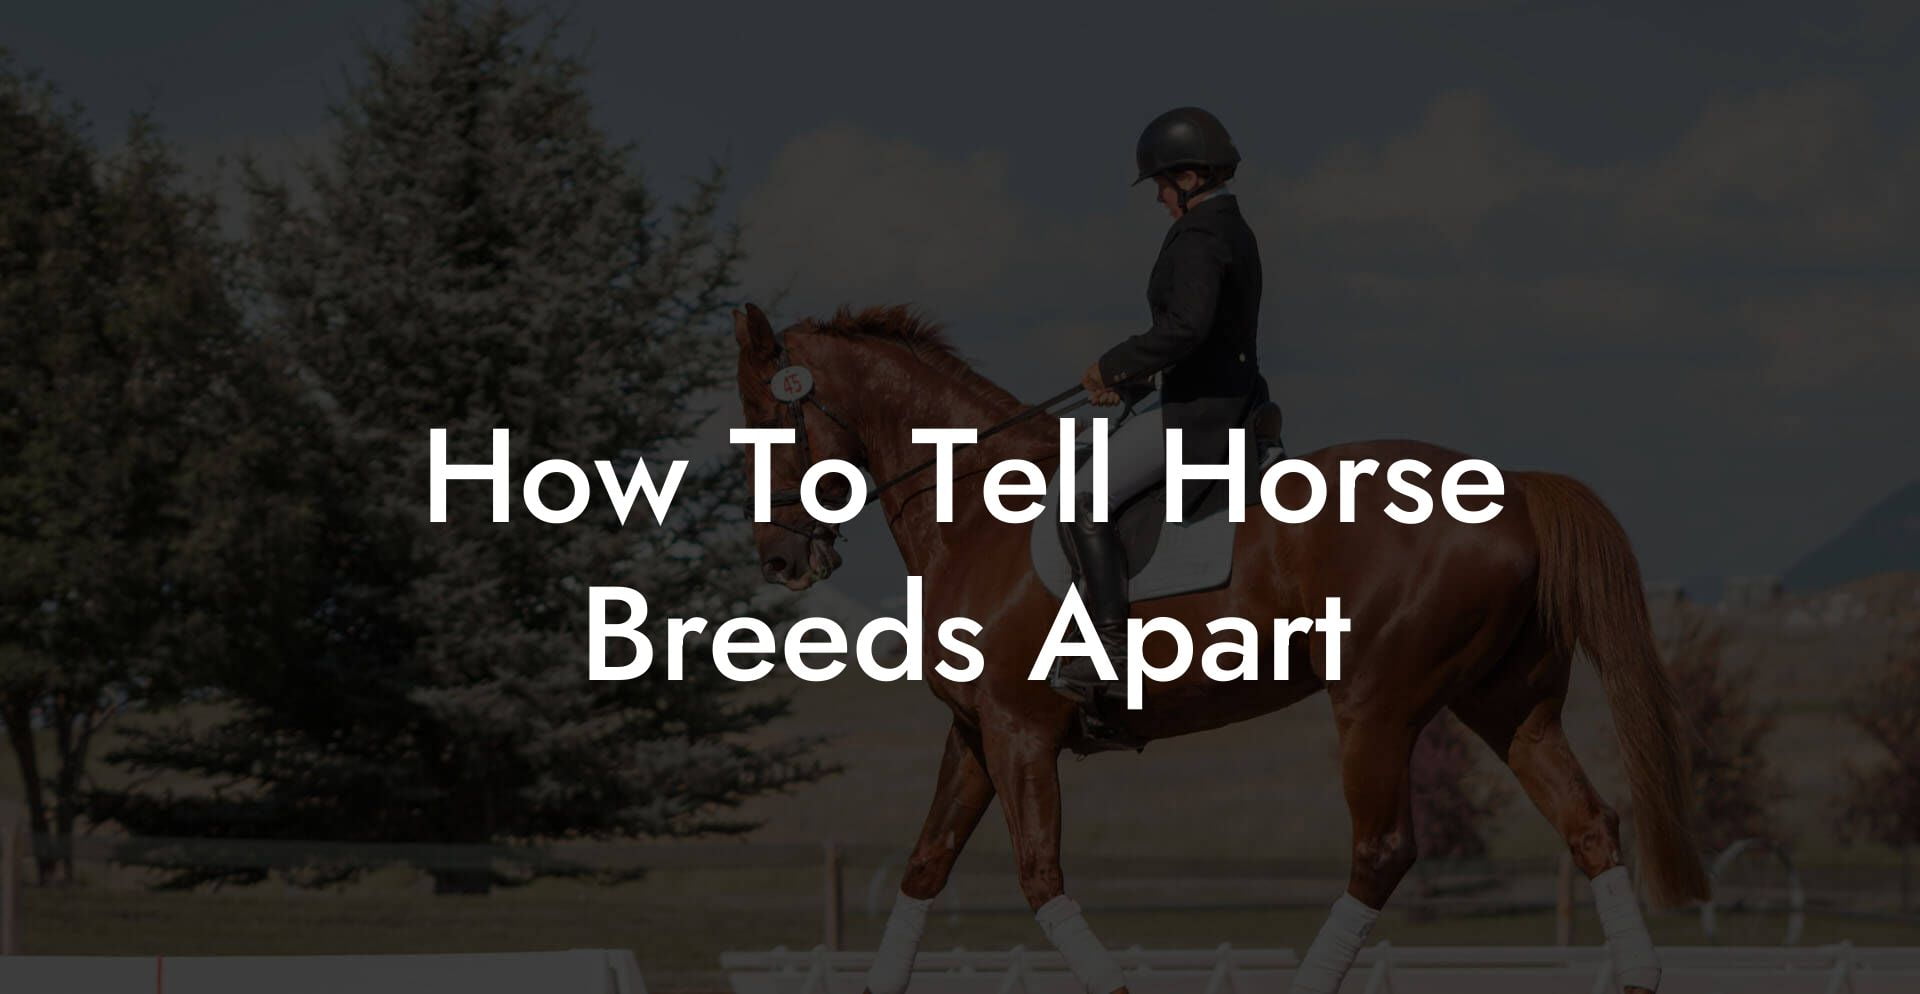 How To Tell Horse Breeds Apart